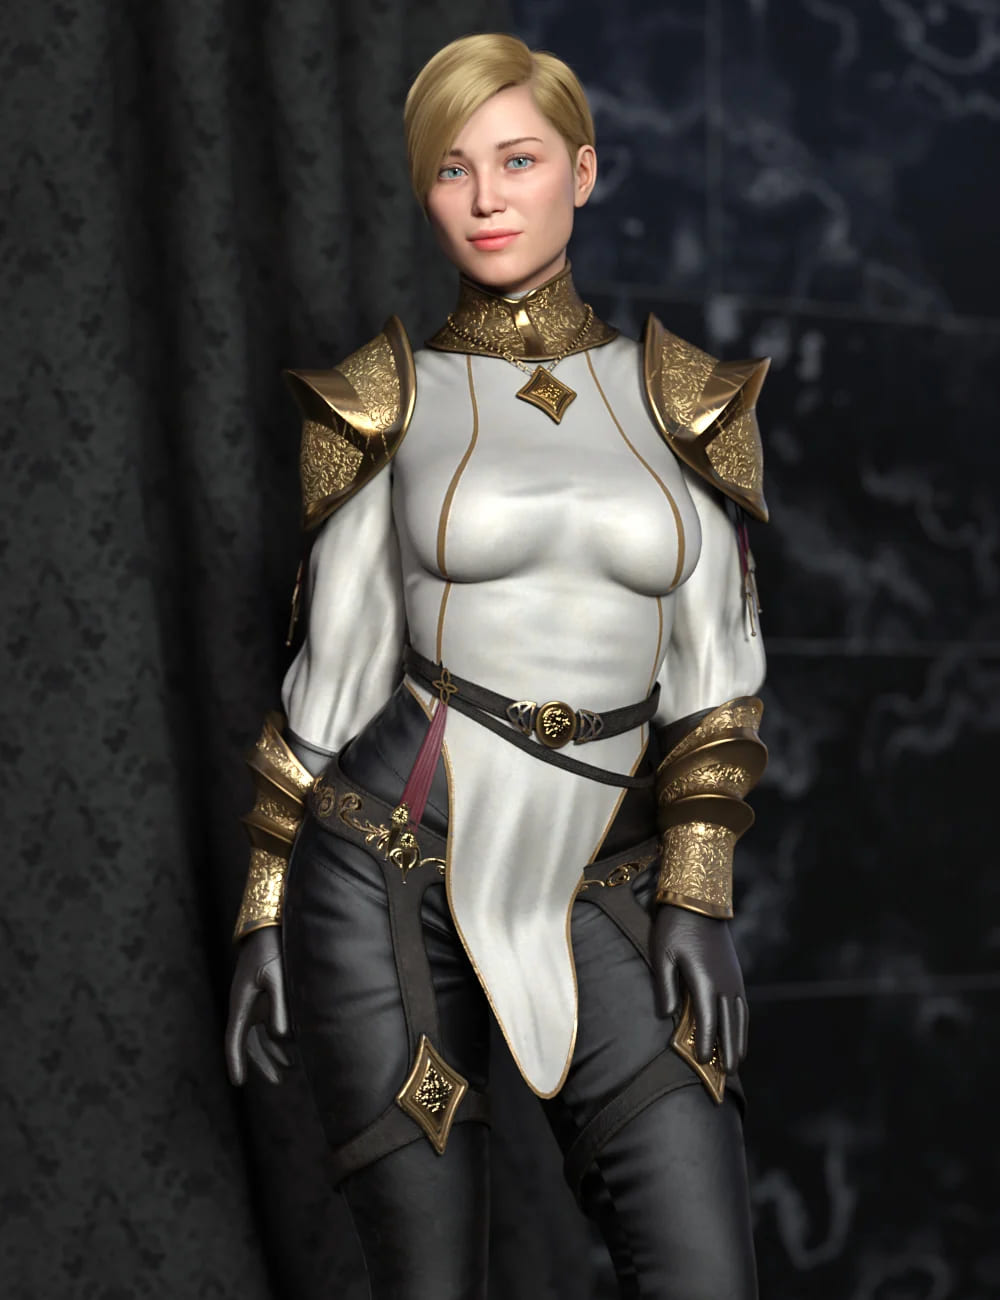 dForce Imperial Cadet Outfit for Genesis 8 and 8.1 Females_DAZ3D下载站